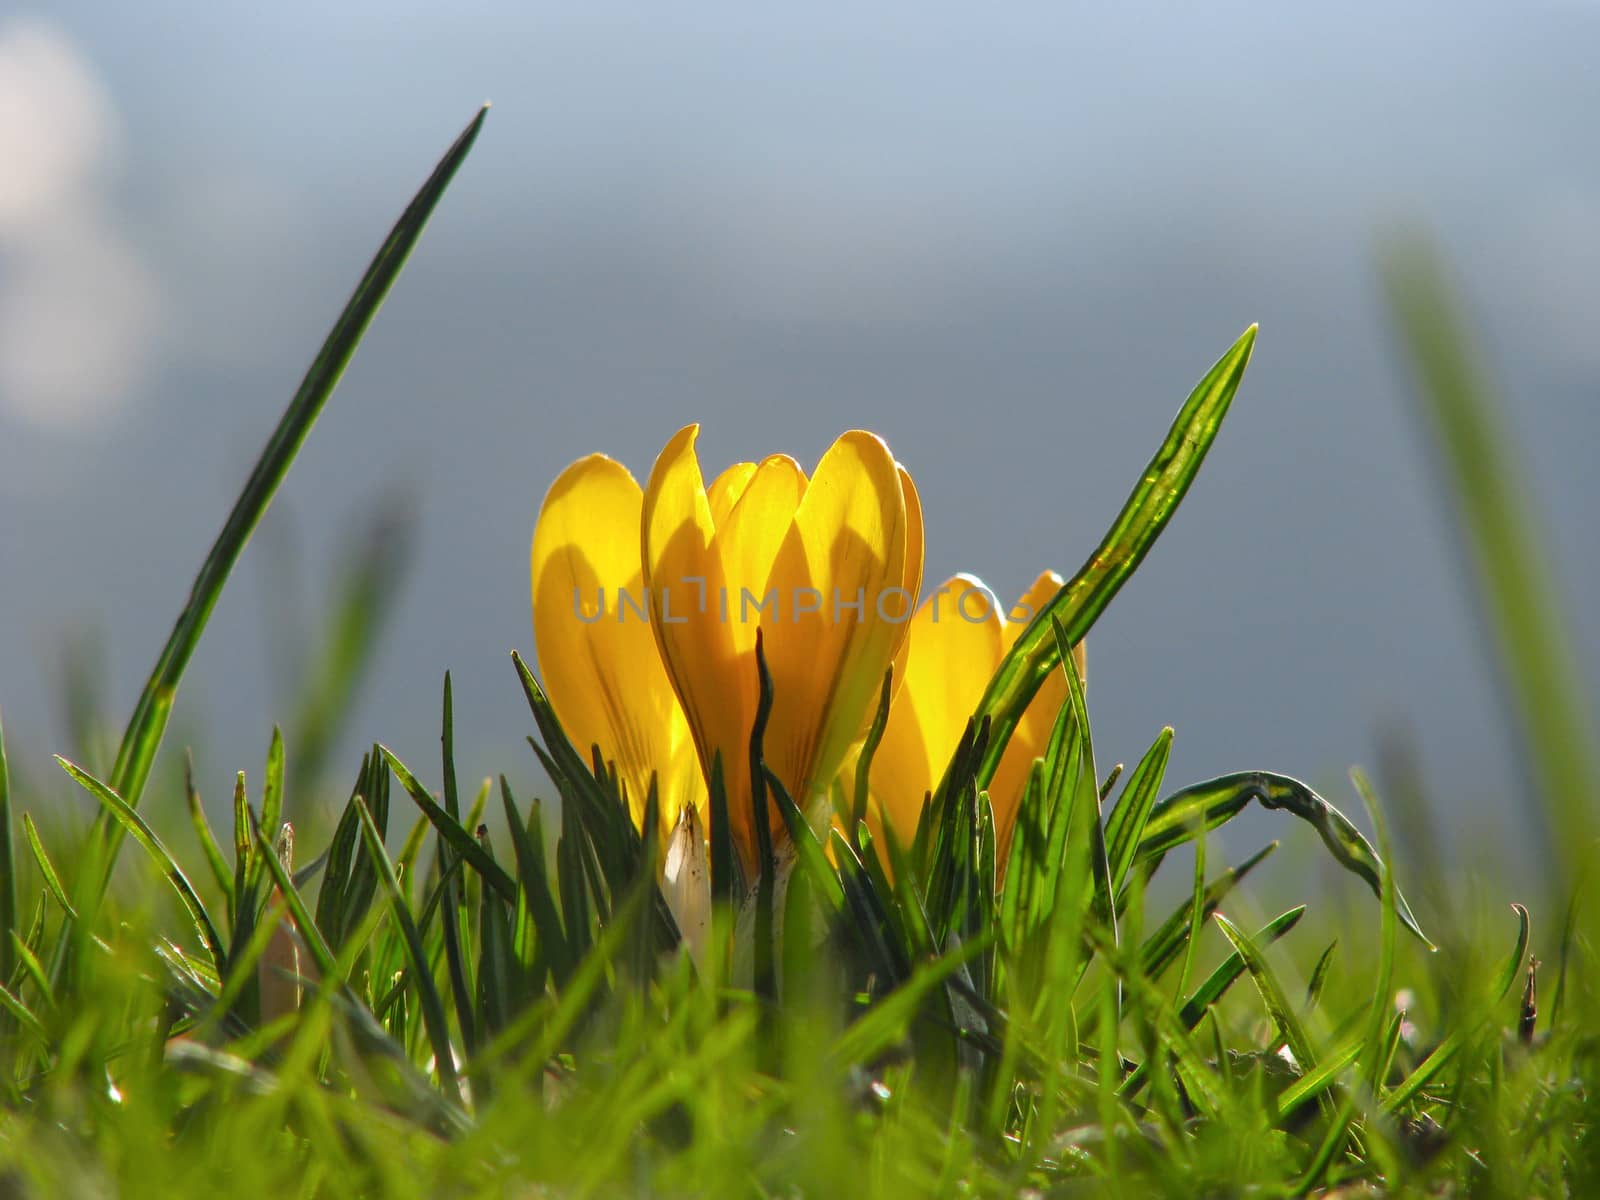 A Bright Yellow Crocus Flower in the Spring Sunshine